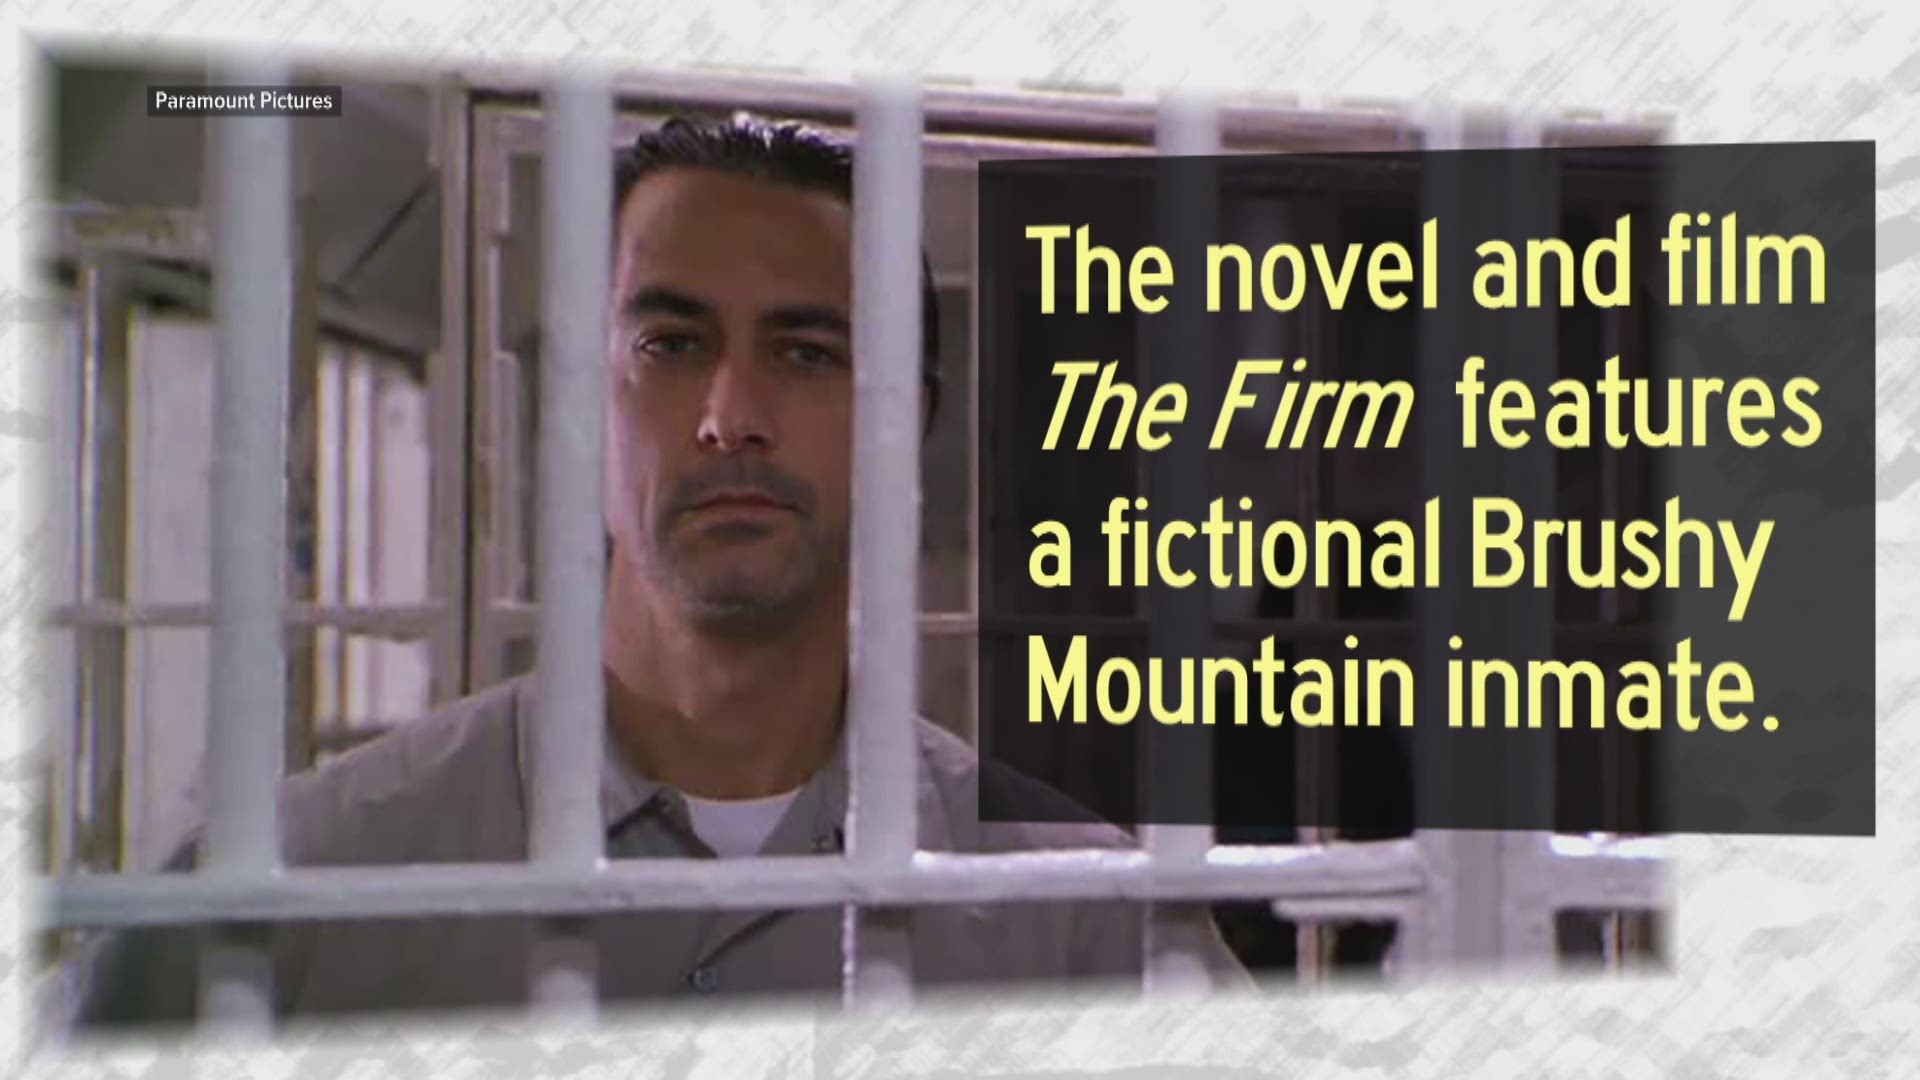 May 6, 2018: Sidebar about the many cultural influences of Brushy Mountain Prison in movies, music, and literature.